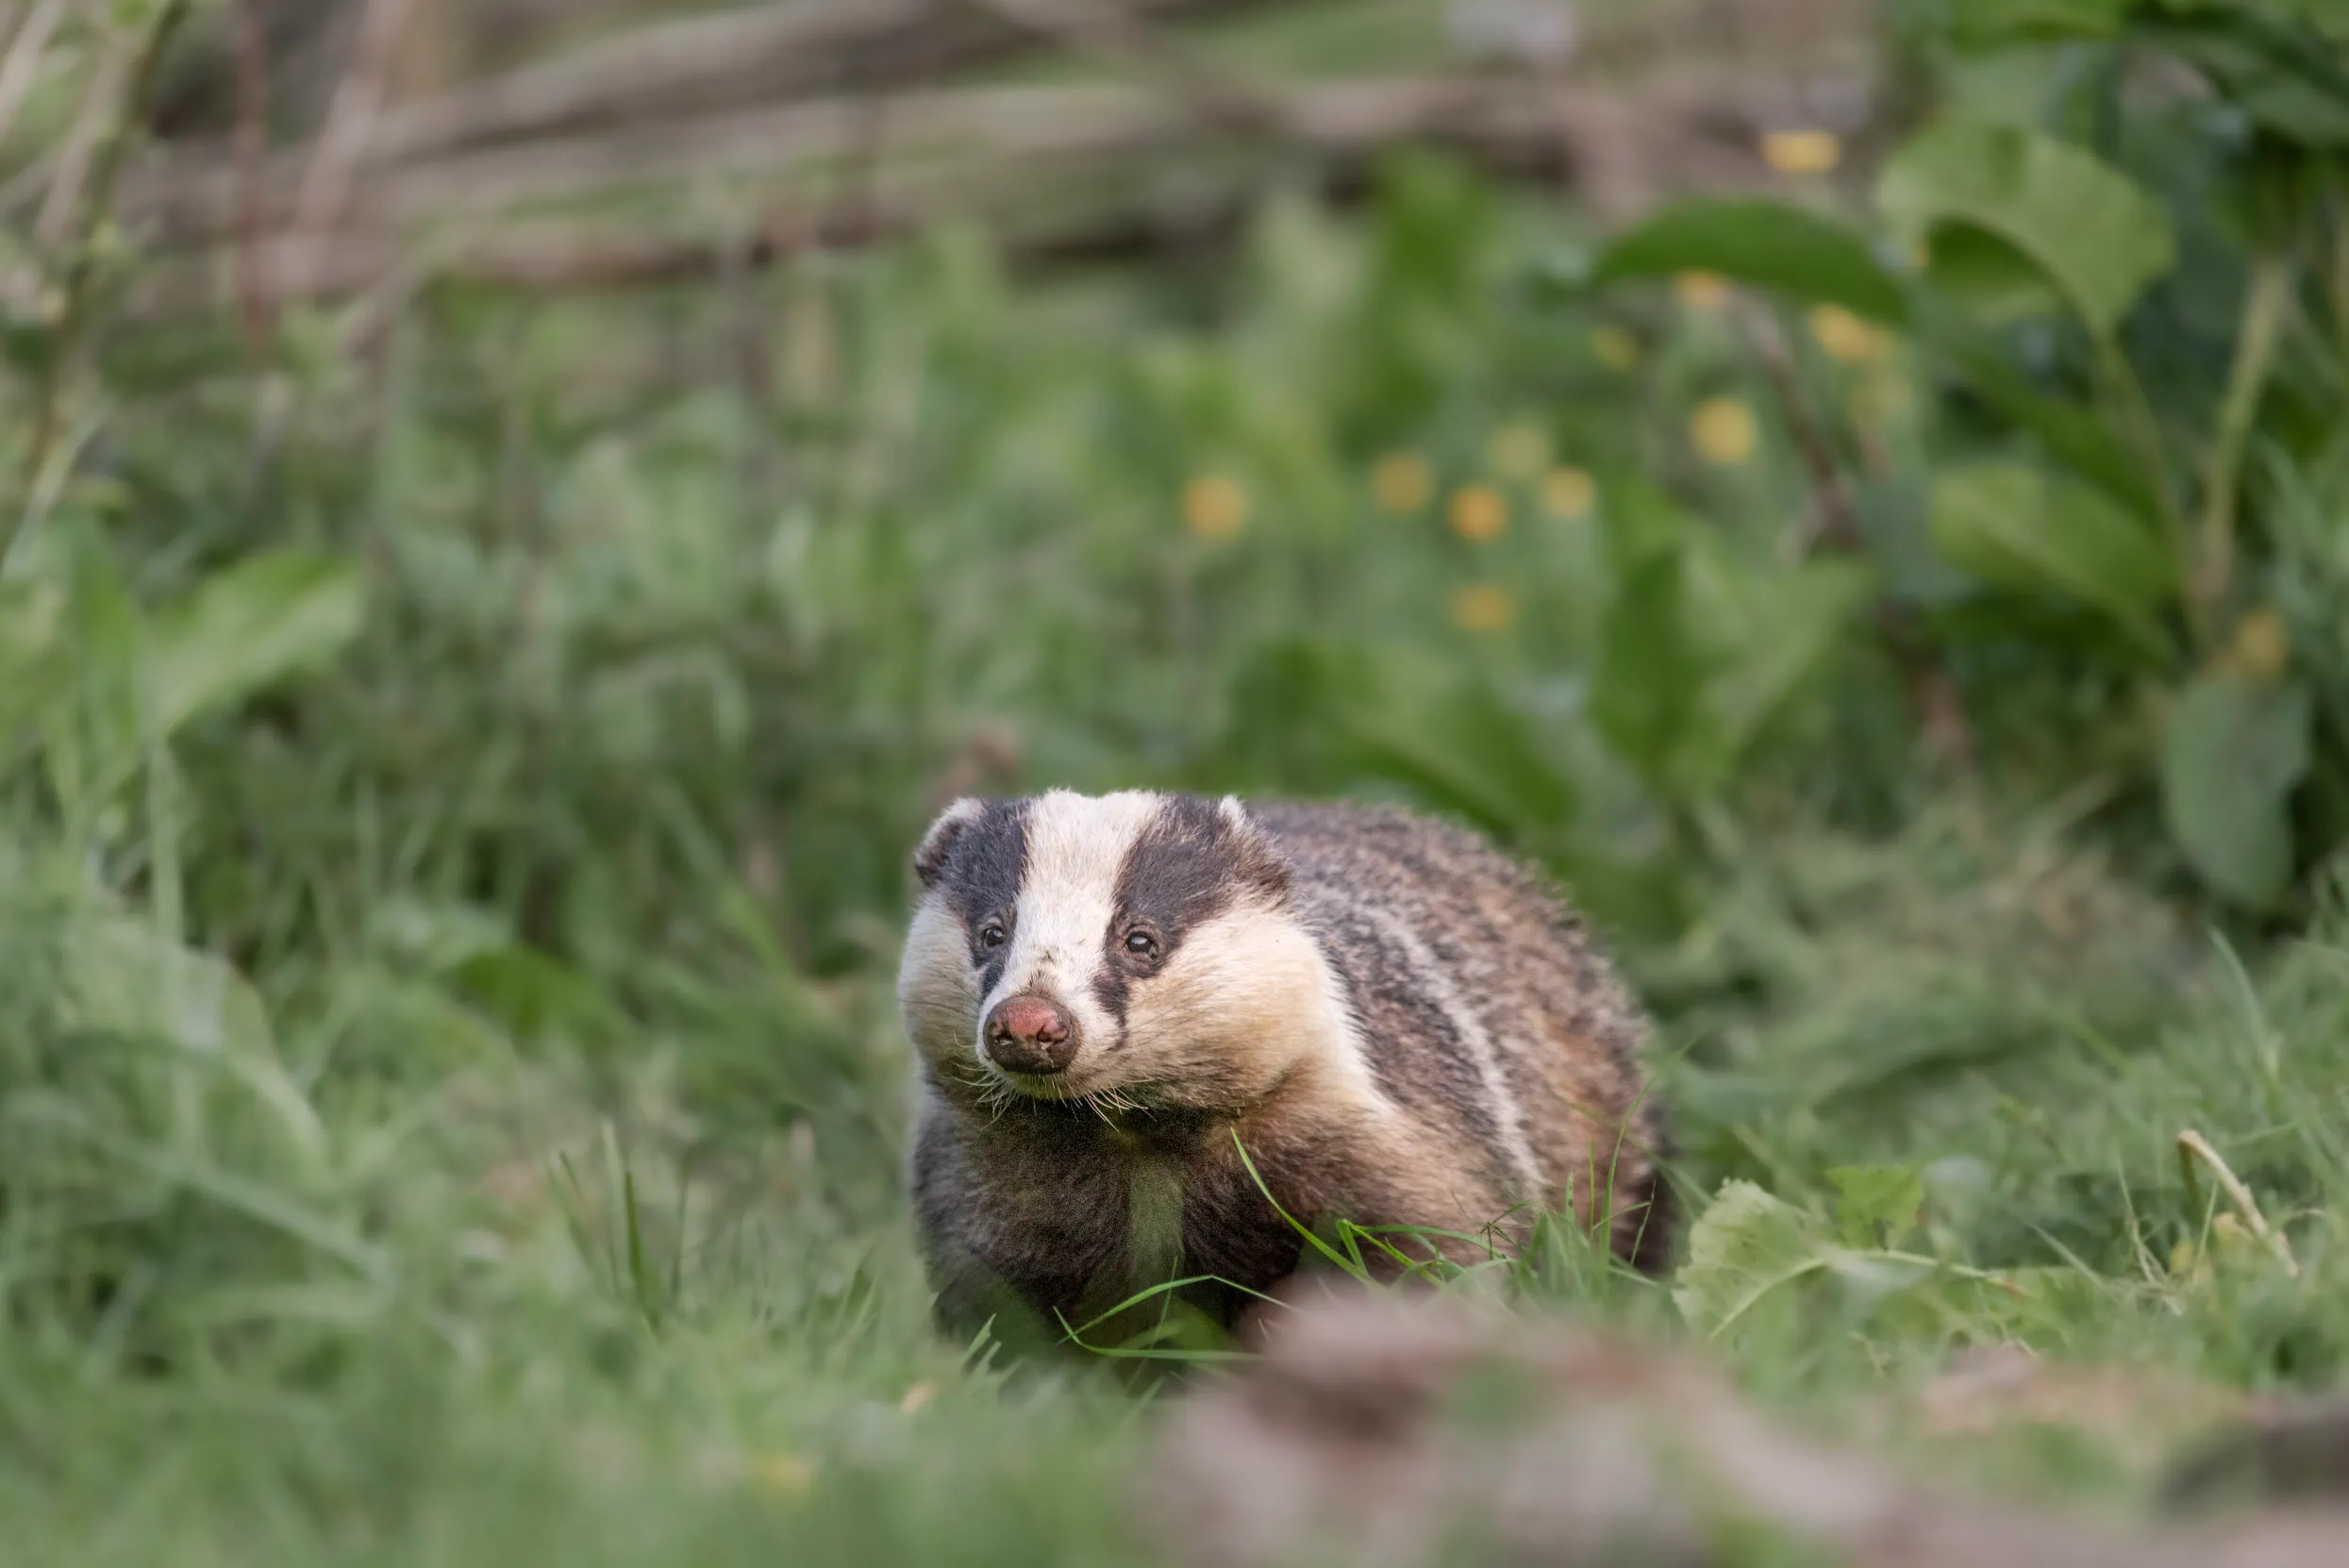 A badger stood on green grass, looking past the camera